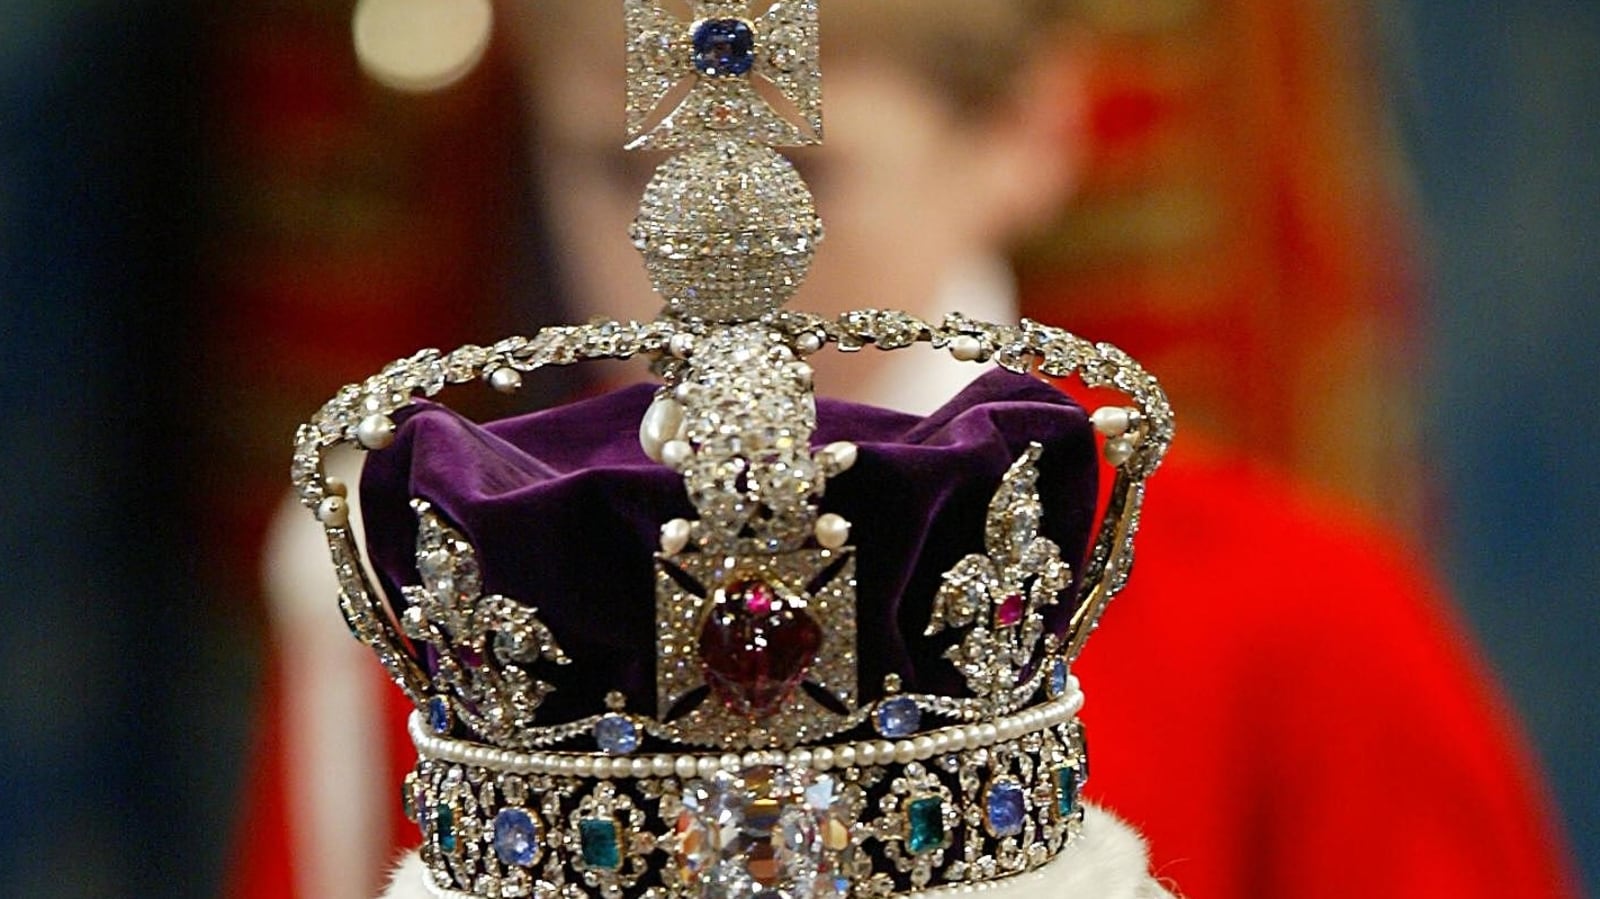 Will India ever get back the Koh-i-Noor diamond?